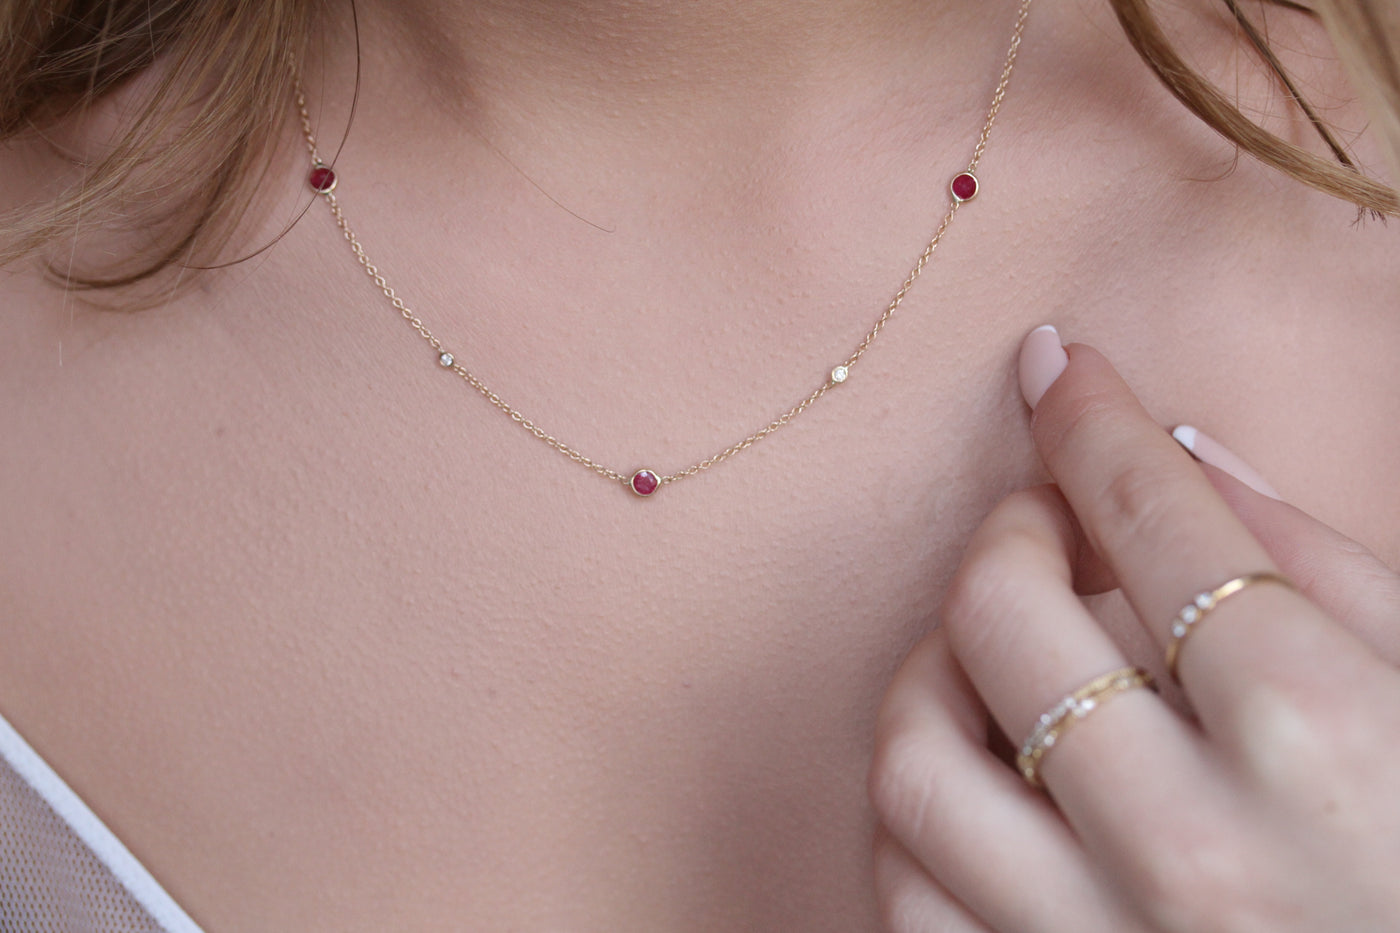 14K Solid Gold Five Station Ruby Diamond By The Yard Necklace